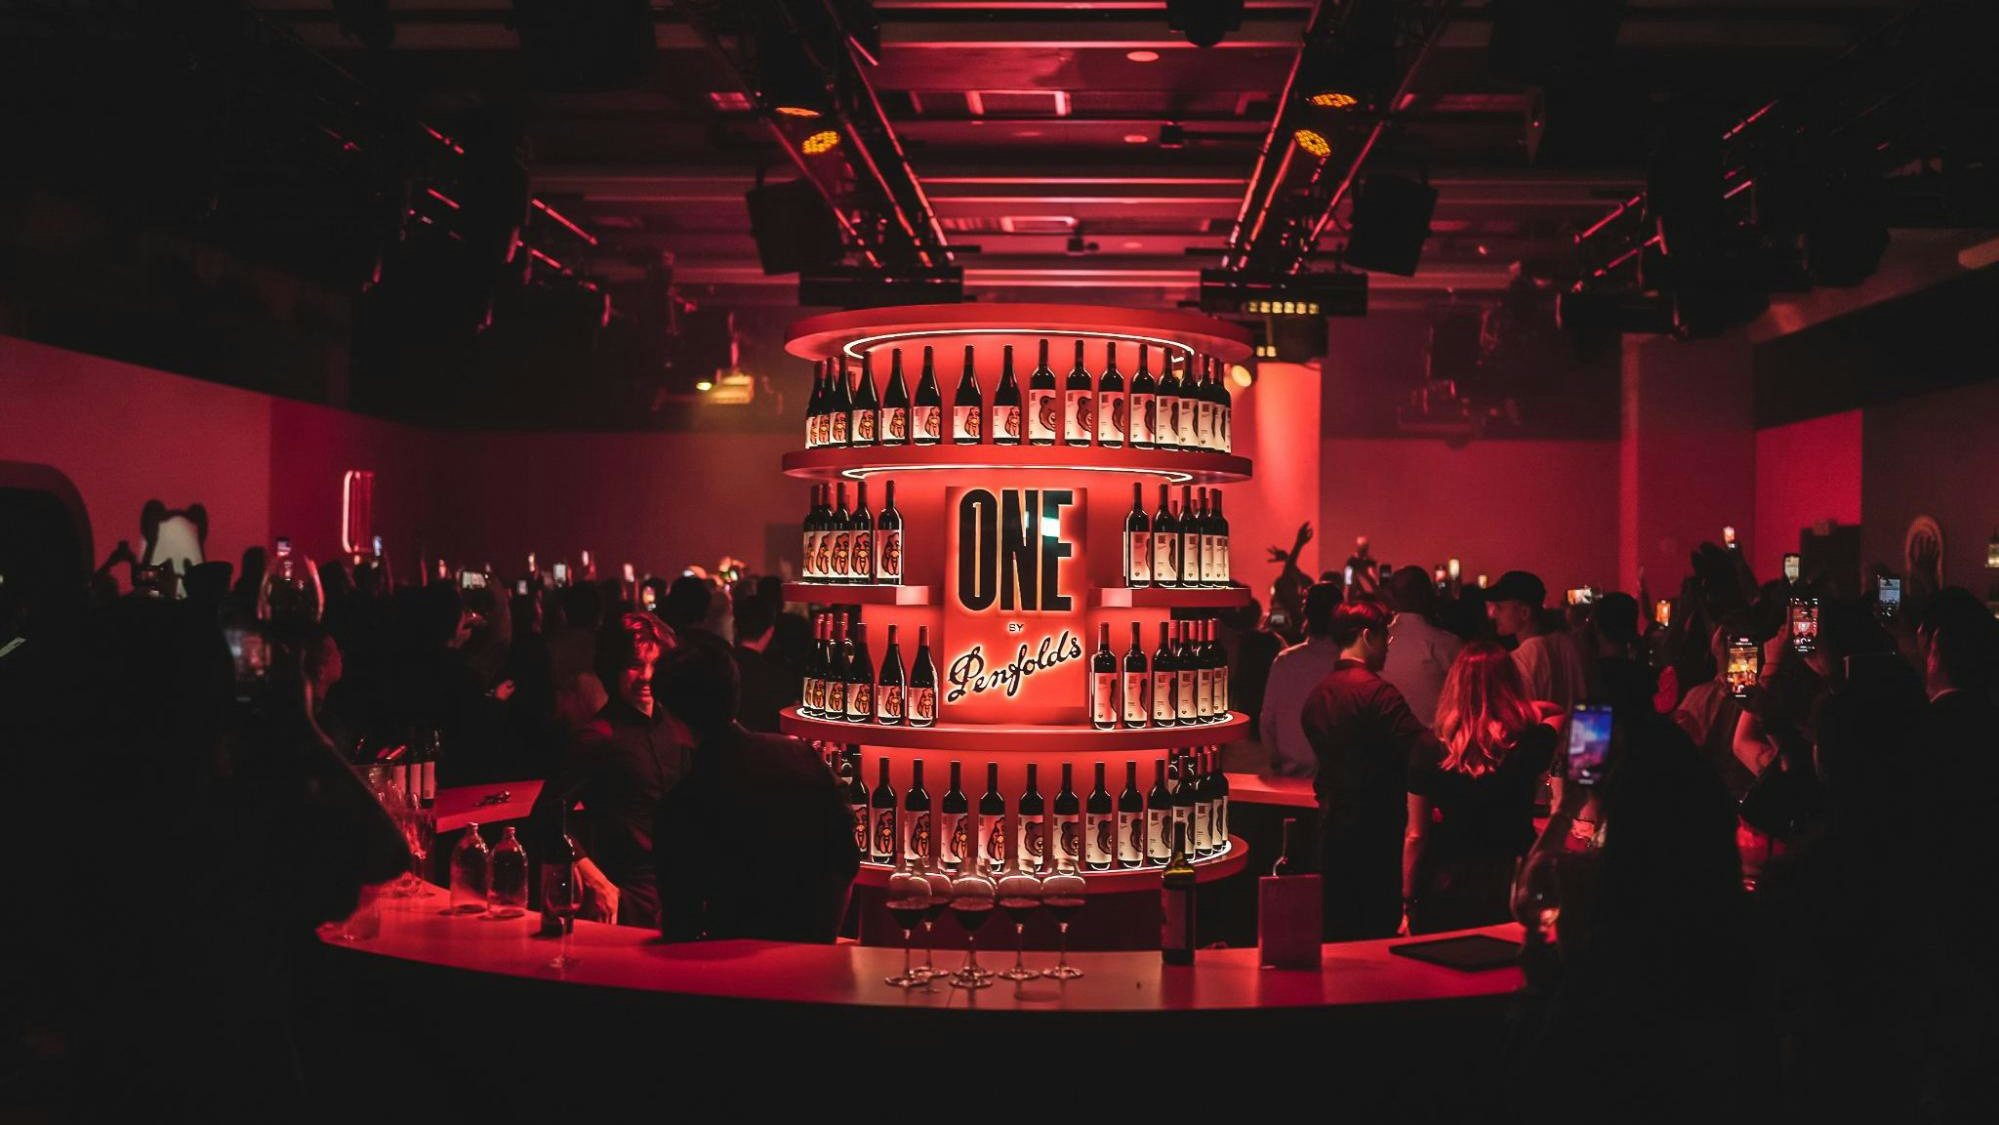 Like the One by Penfolds range, the global launch party provided an integrated experience covering creativity, art, fashion, and wine. Photo: Penfolds 